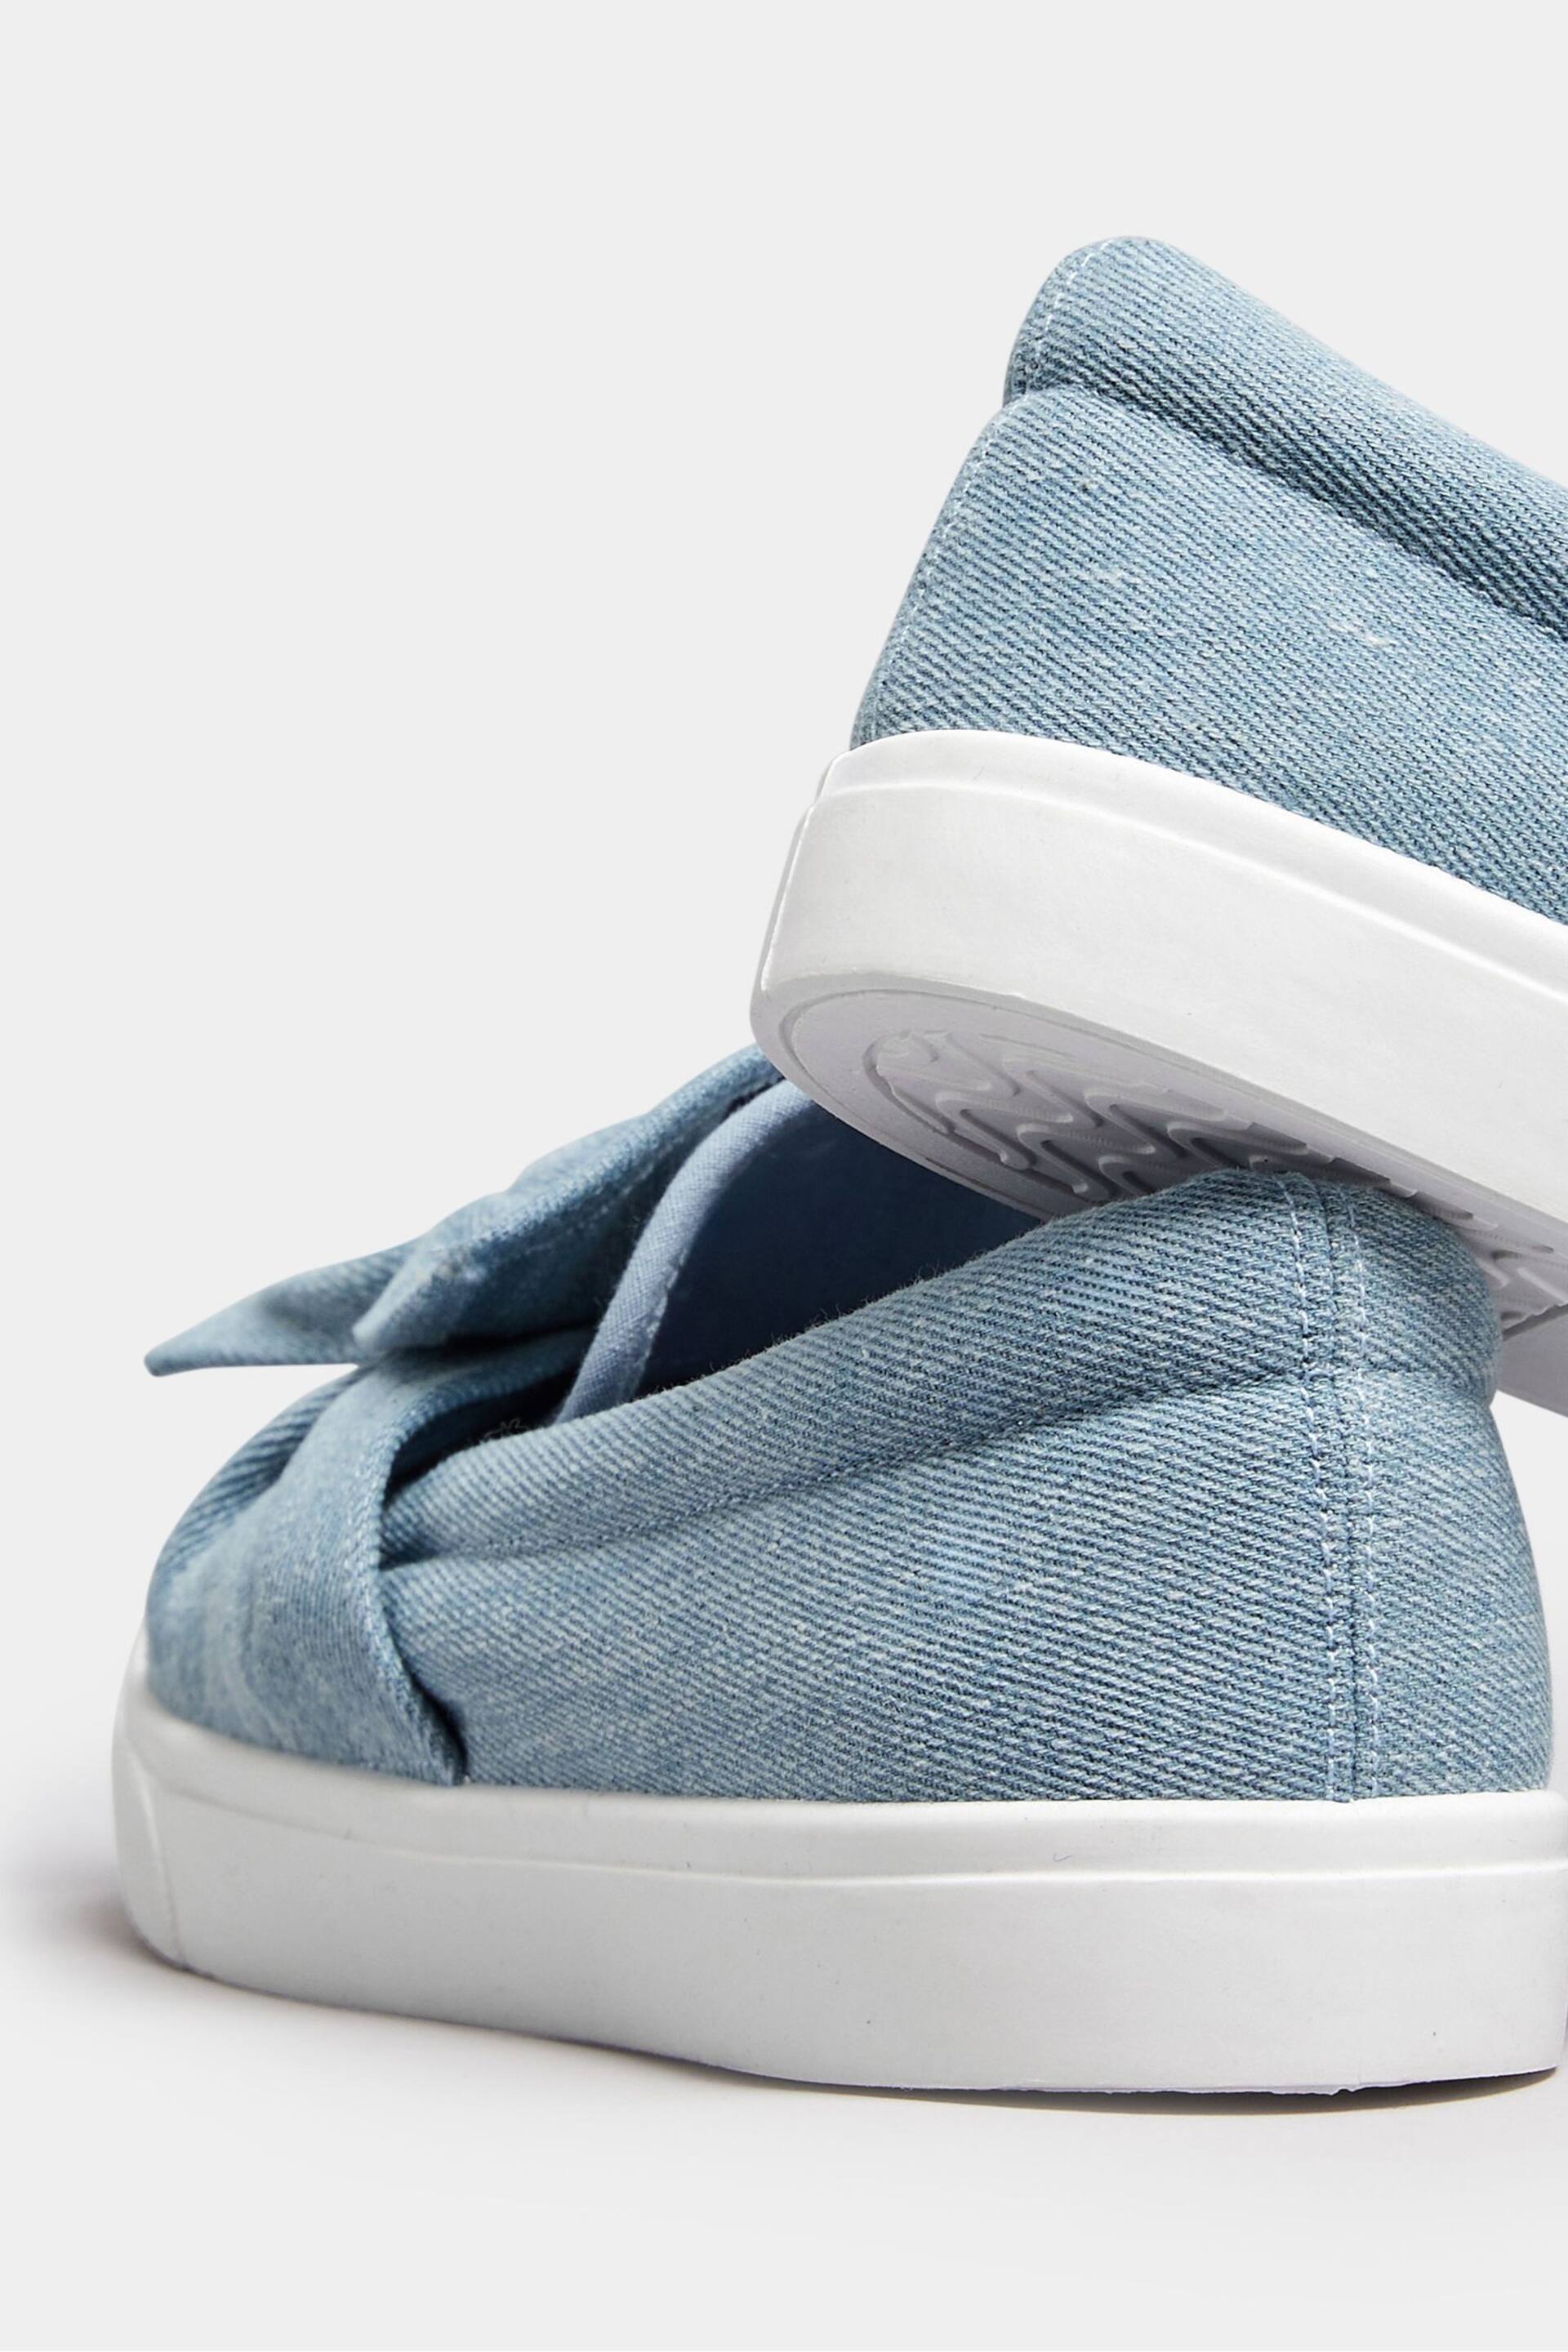 Yours Curve Blue Denim Twisted Bow Slip-On Trainers In Wide E Fit - Image 4 of 4